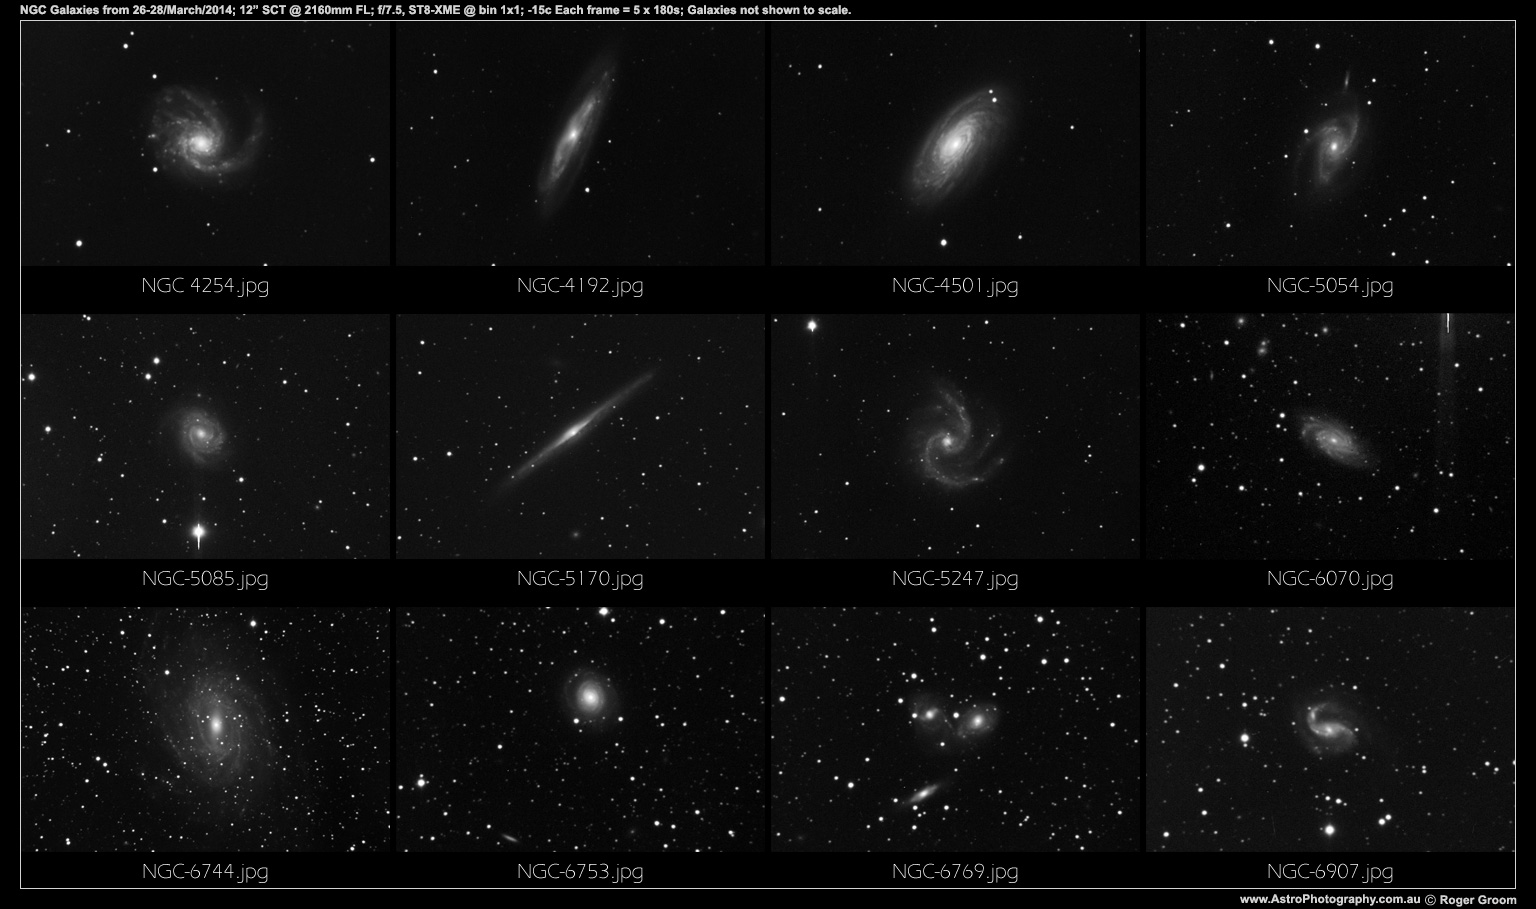 NGC Galaxies 26 28 March 2014